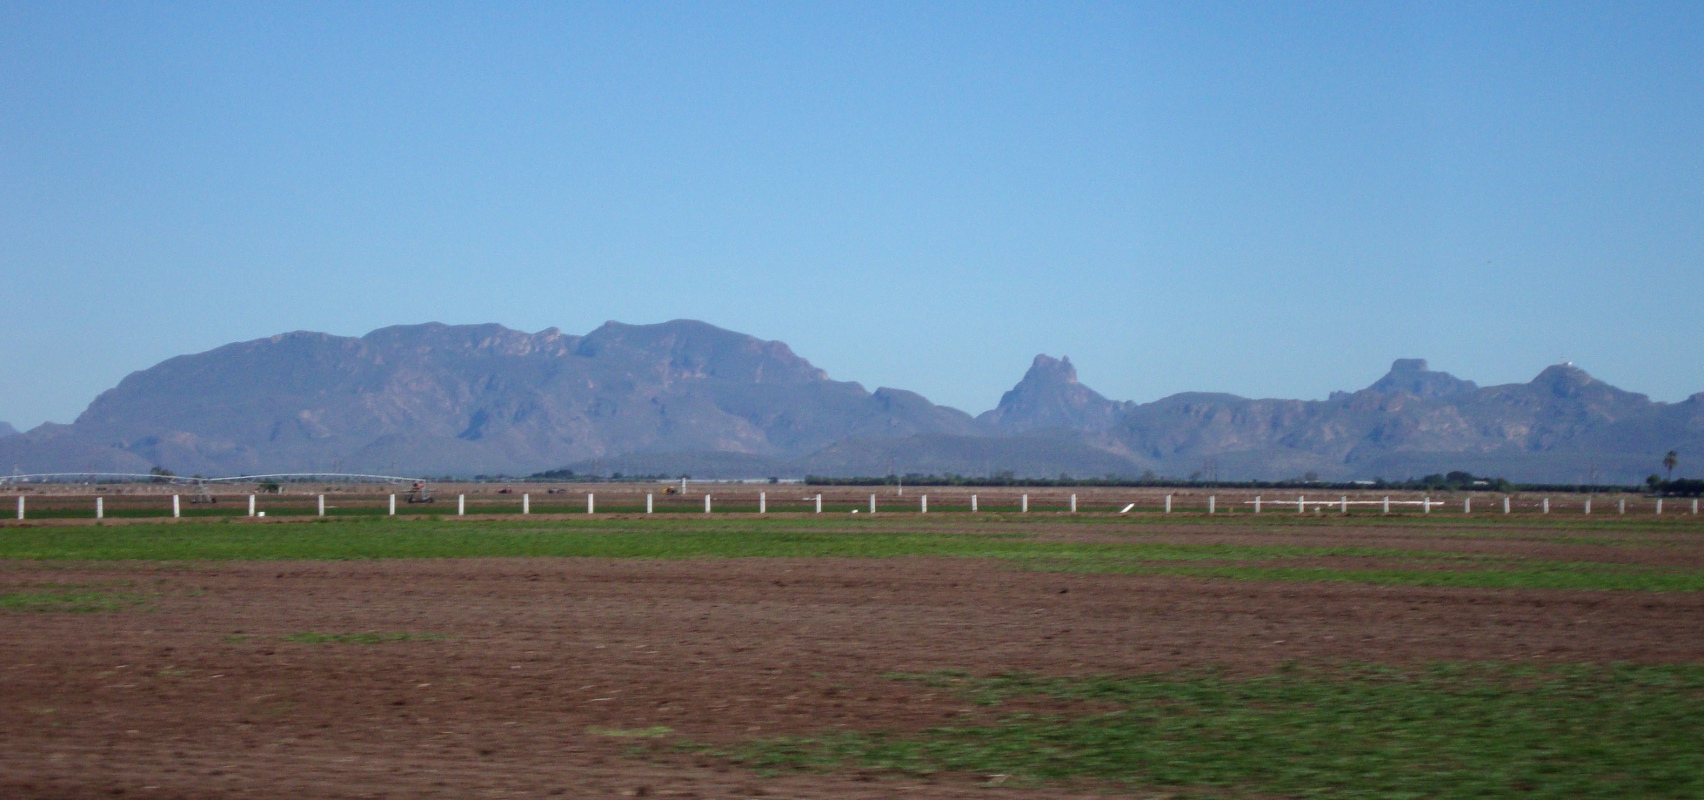 View of countryside outside of Ciudad Obregon, Sonora, Mexico.